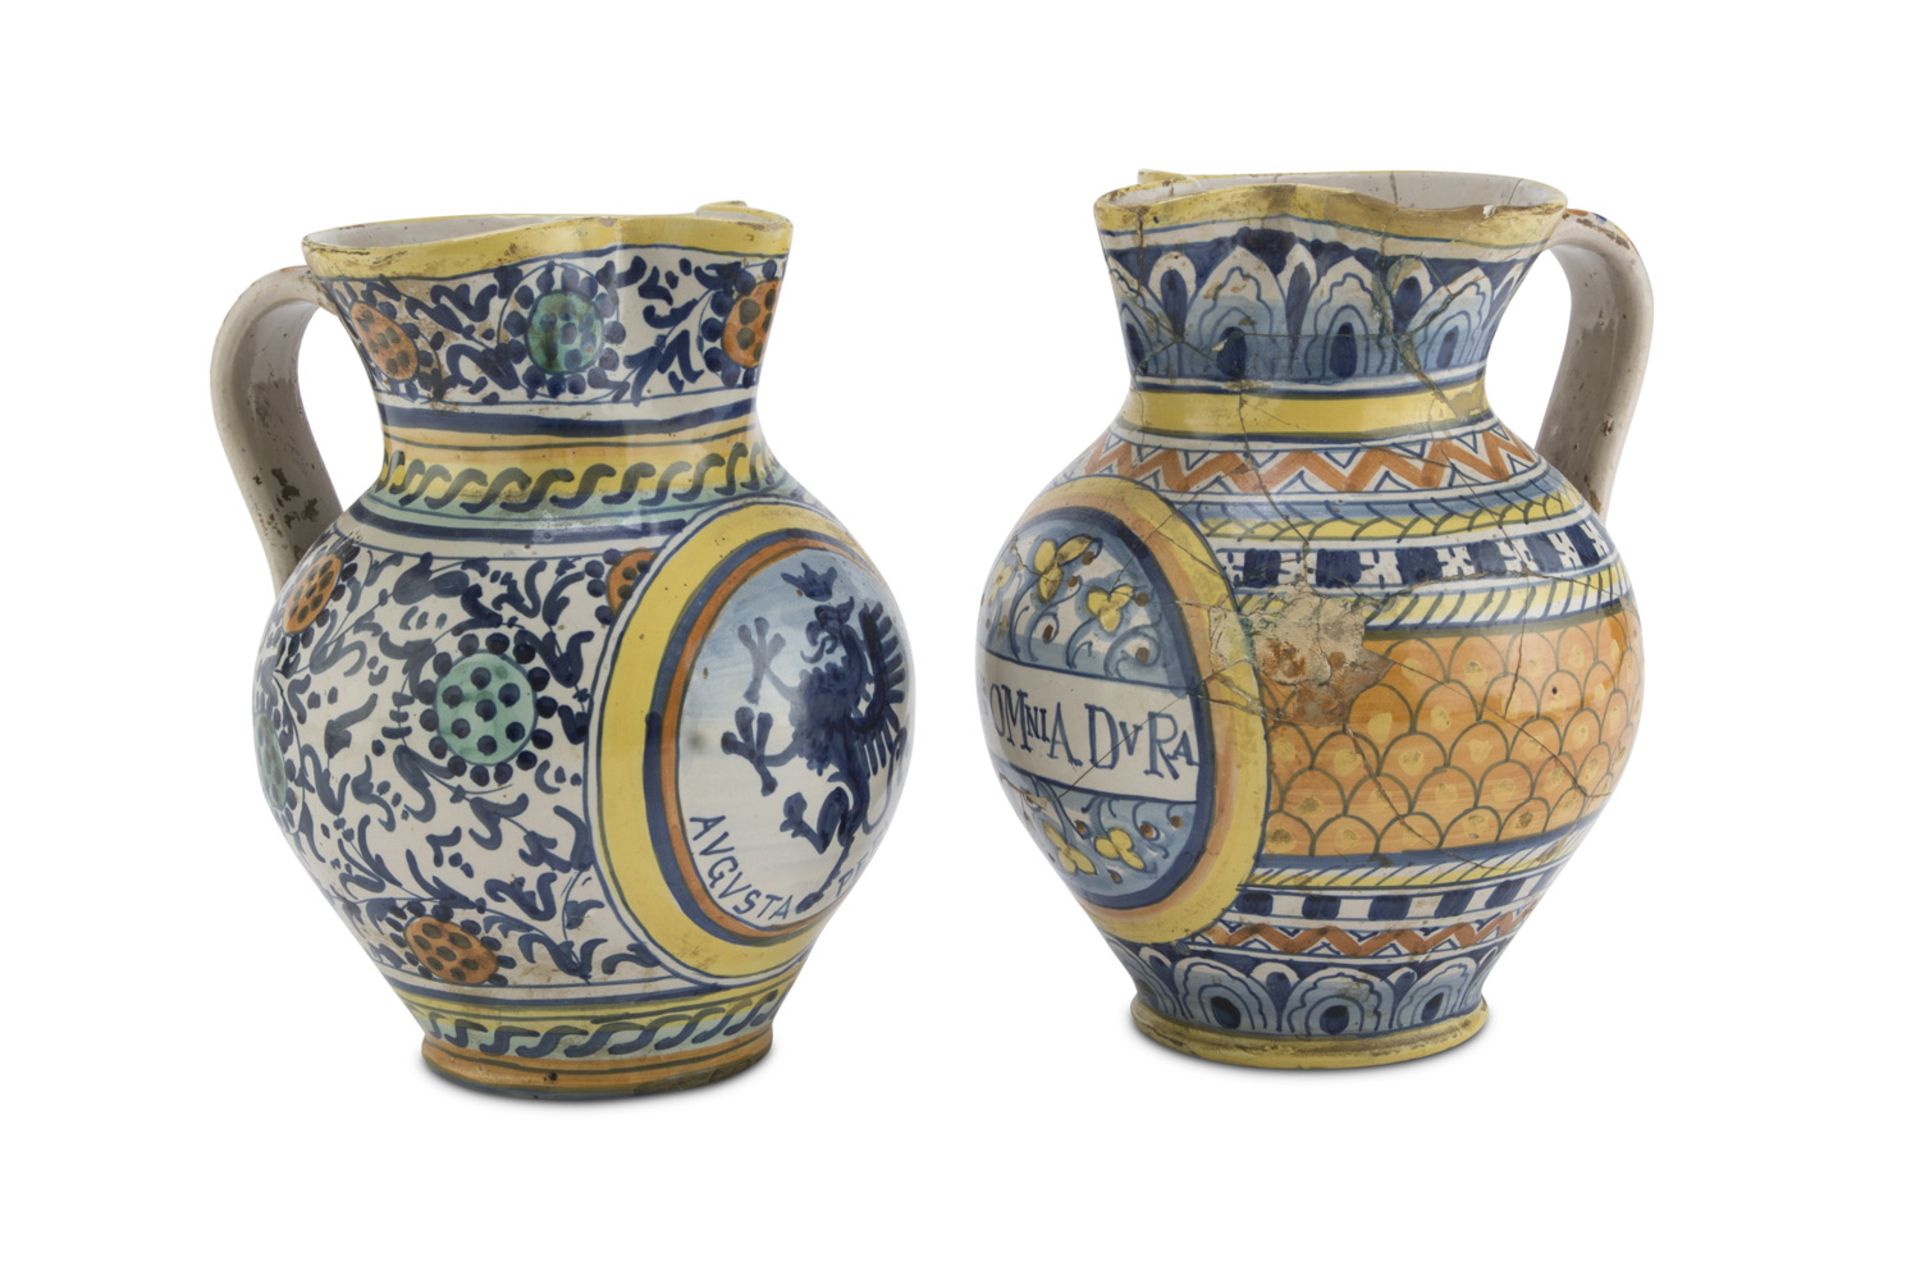 A PAIR OF MAIOLICA JUGS, GRAZIA DERUTA EARLY 20TH CENTURY decorated with coat of arms with